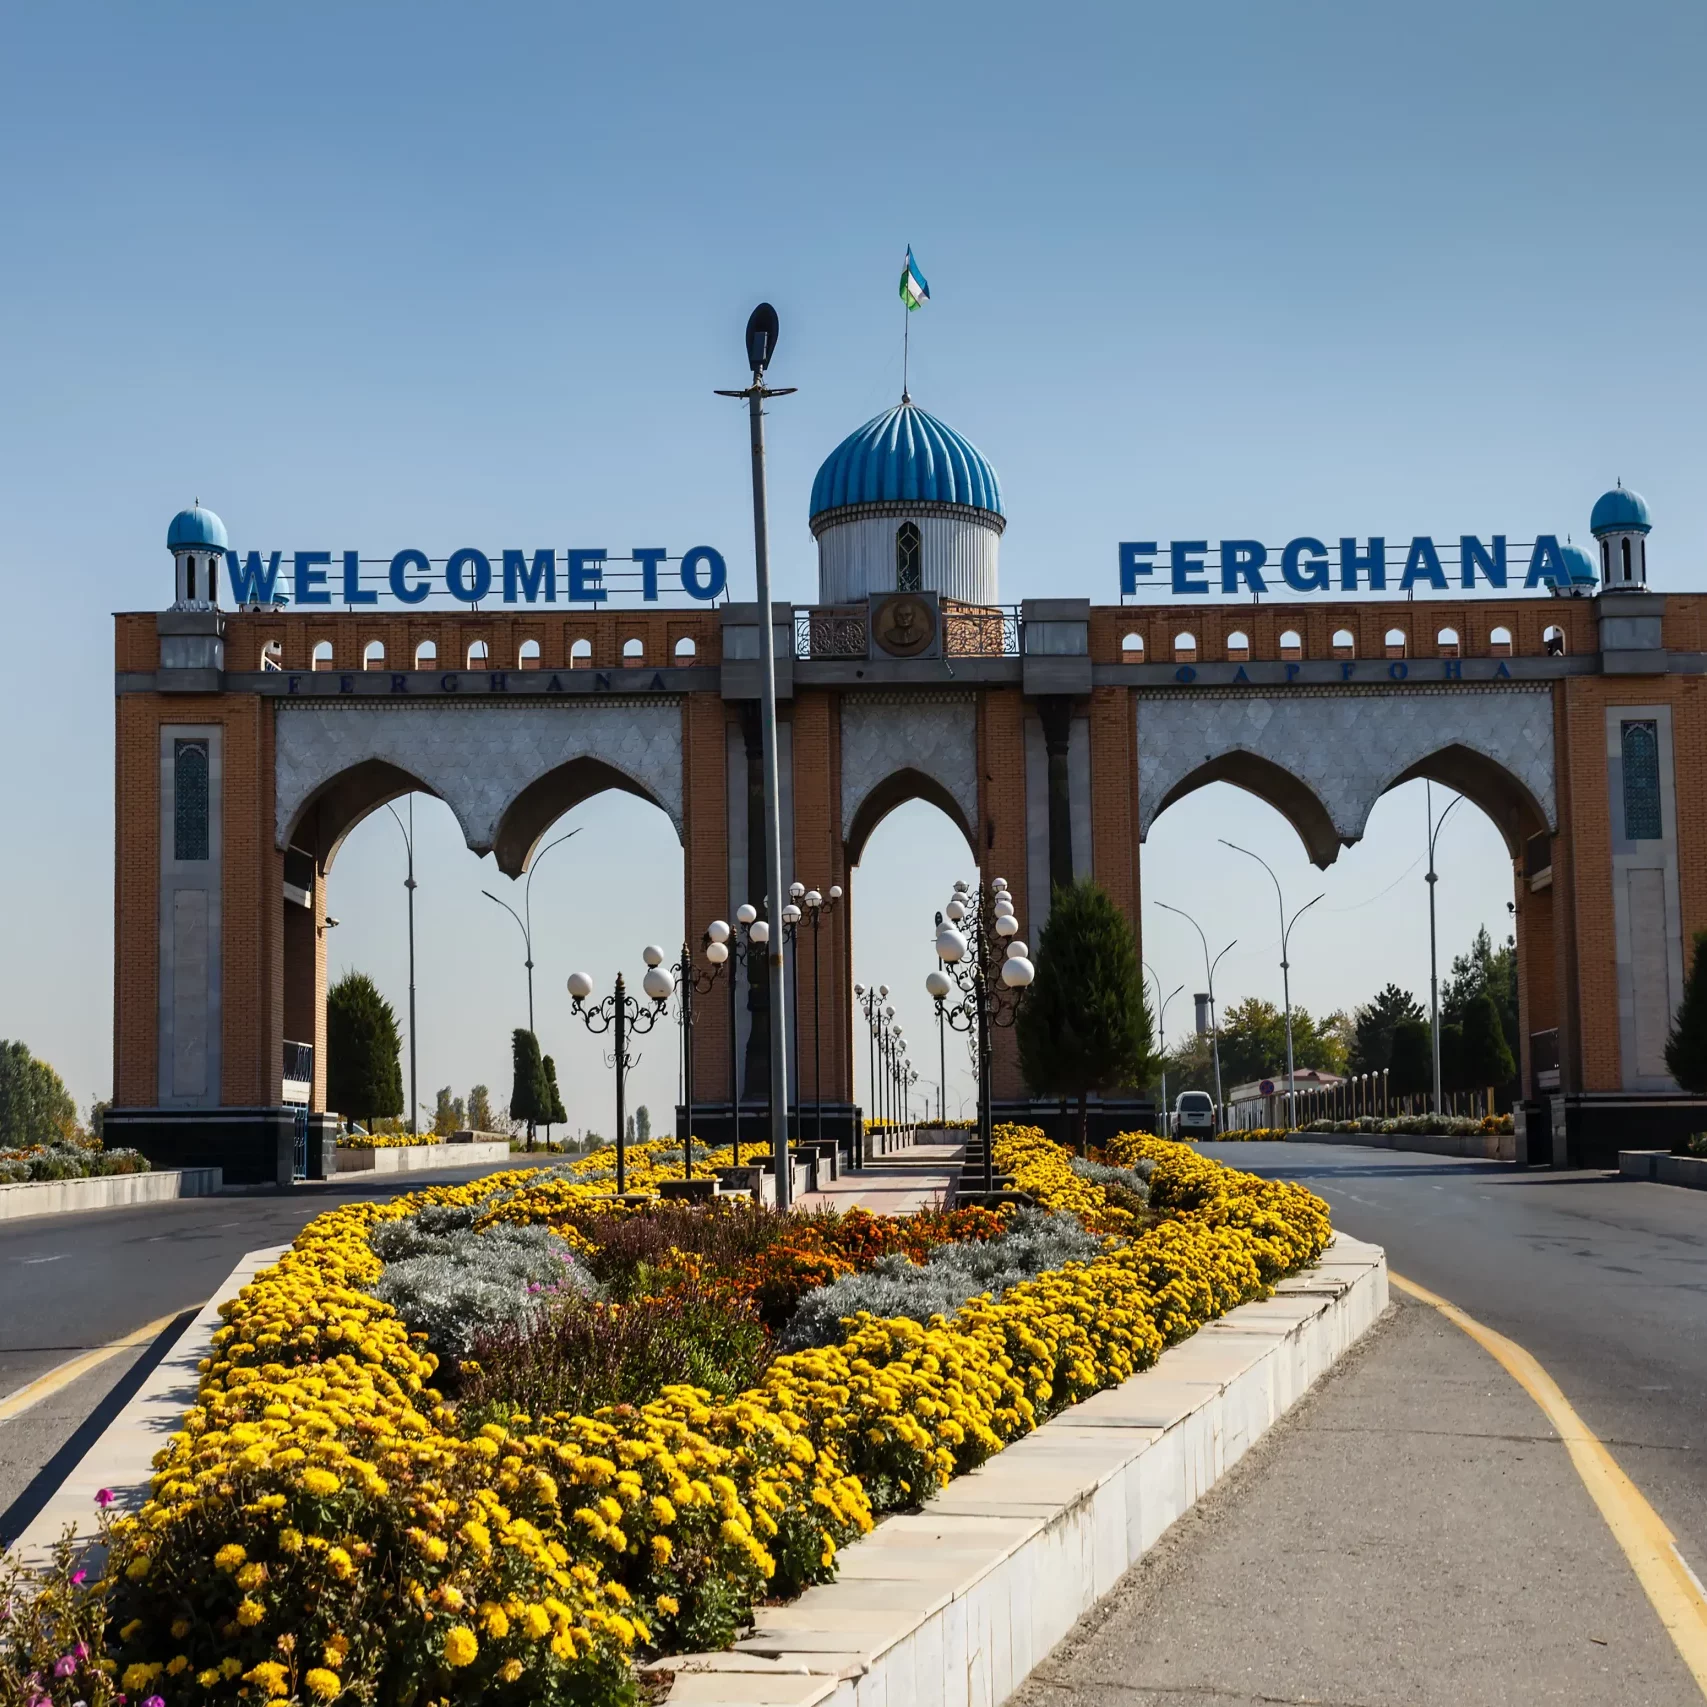 Welcome to Ferghana. Arch at the entrance to Ferghana. Entrance to Ferghana.